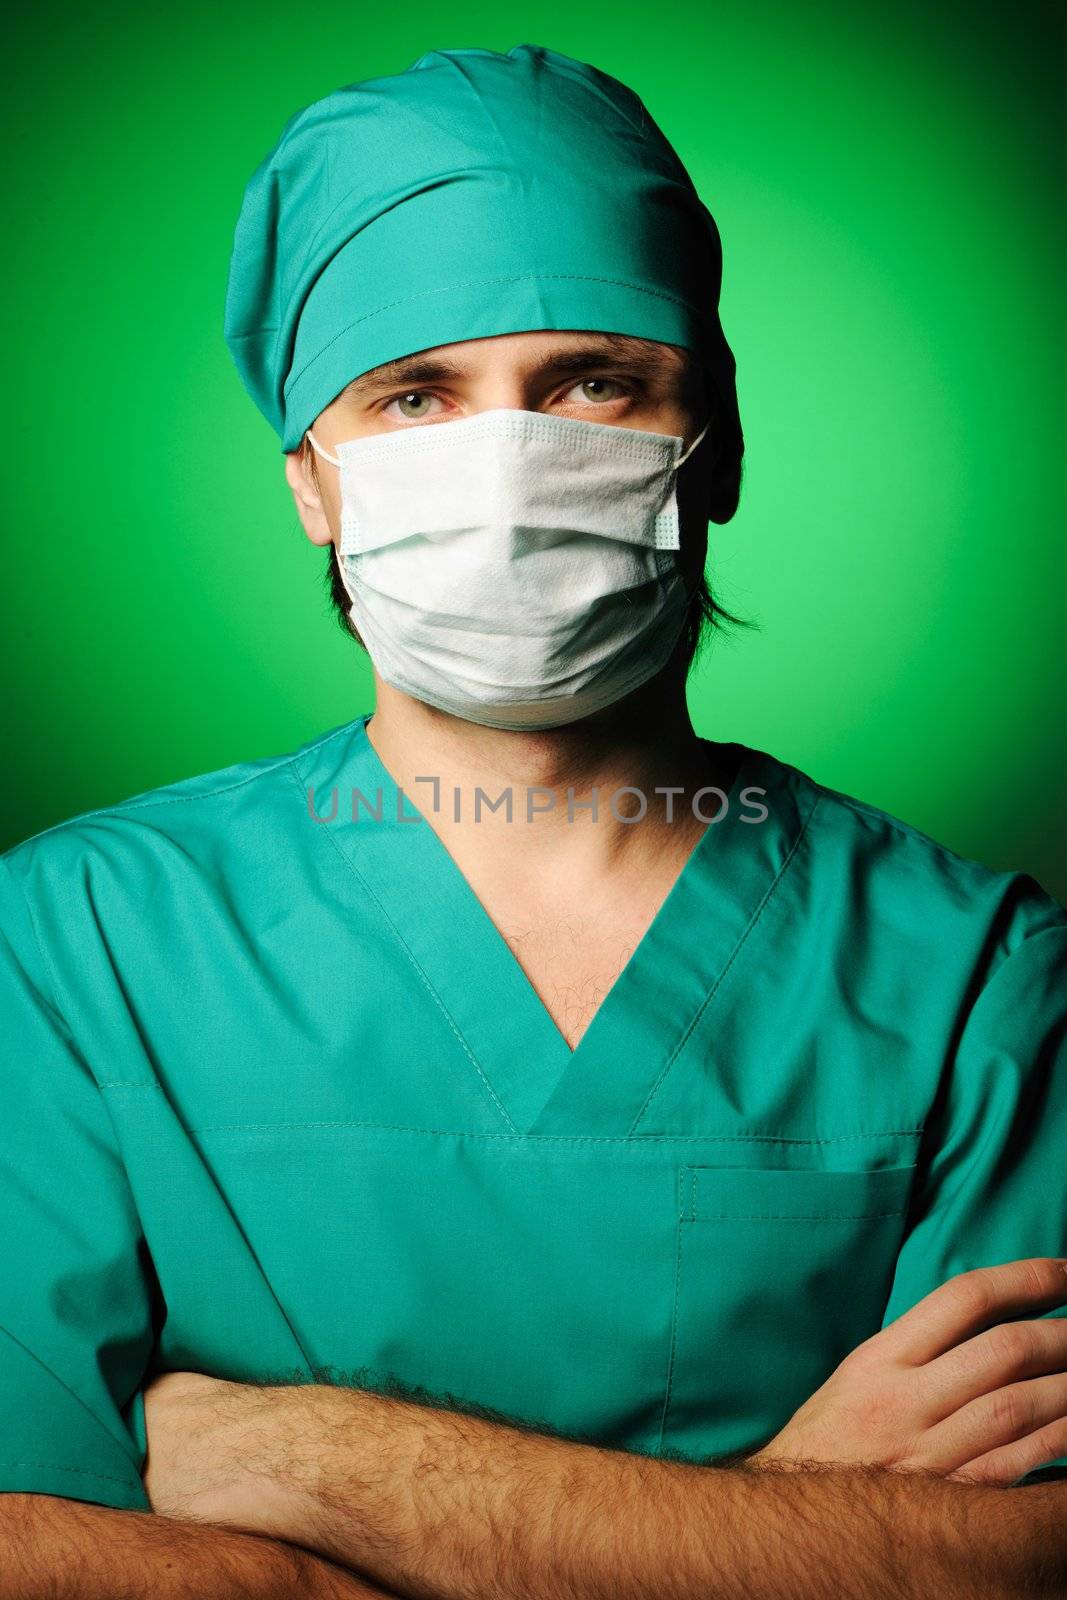 Surgeon by haveseen